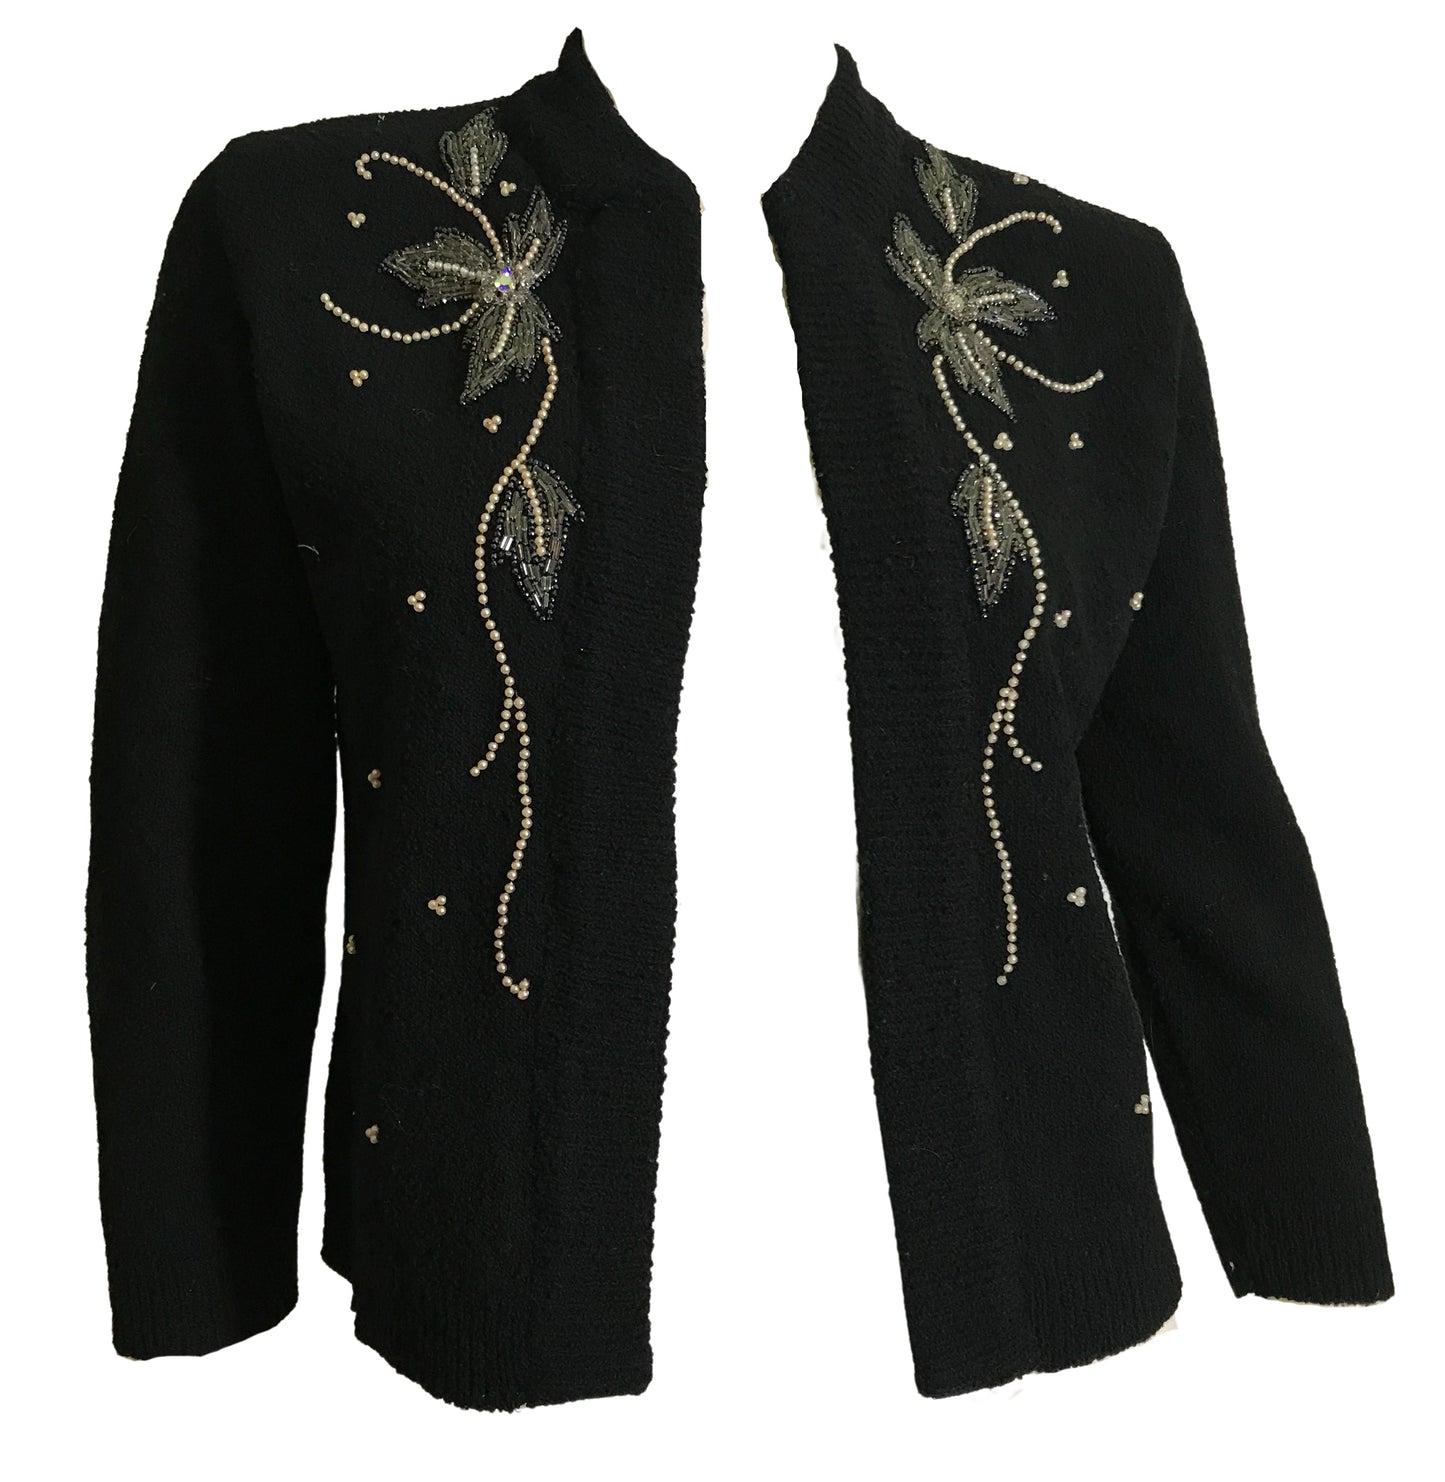 Black Knit Open Front Beaded Cardigan with Rhinestones circa 1940s